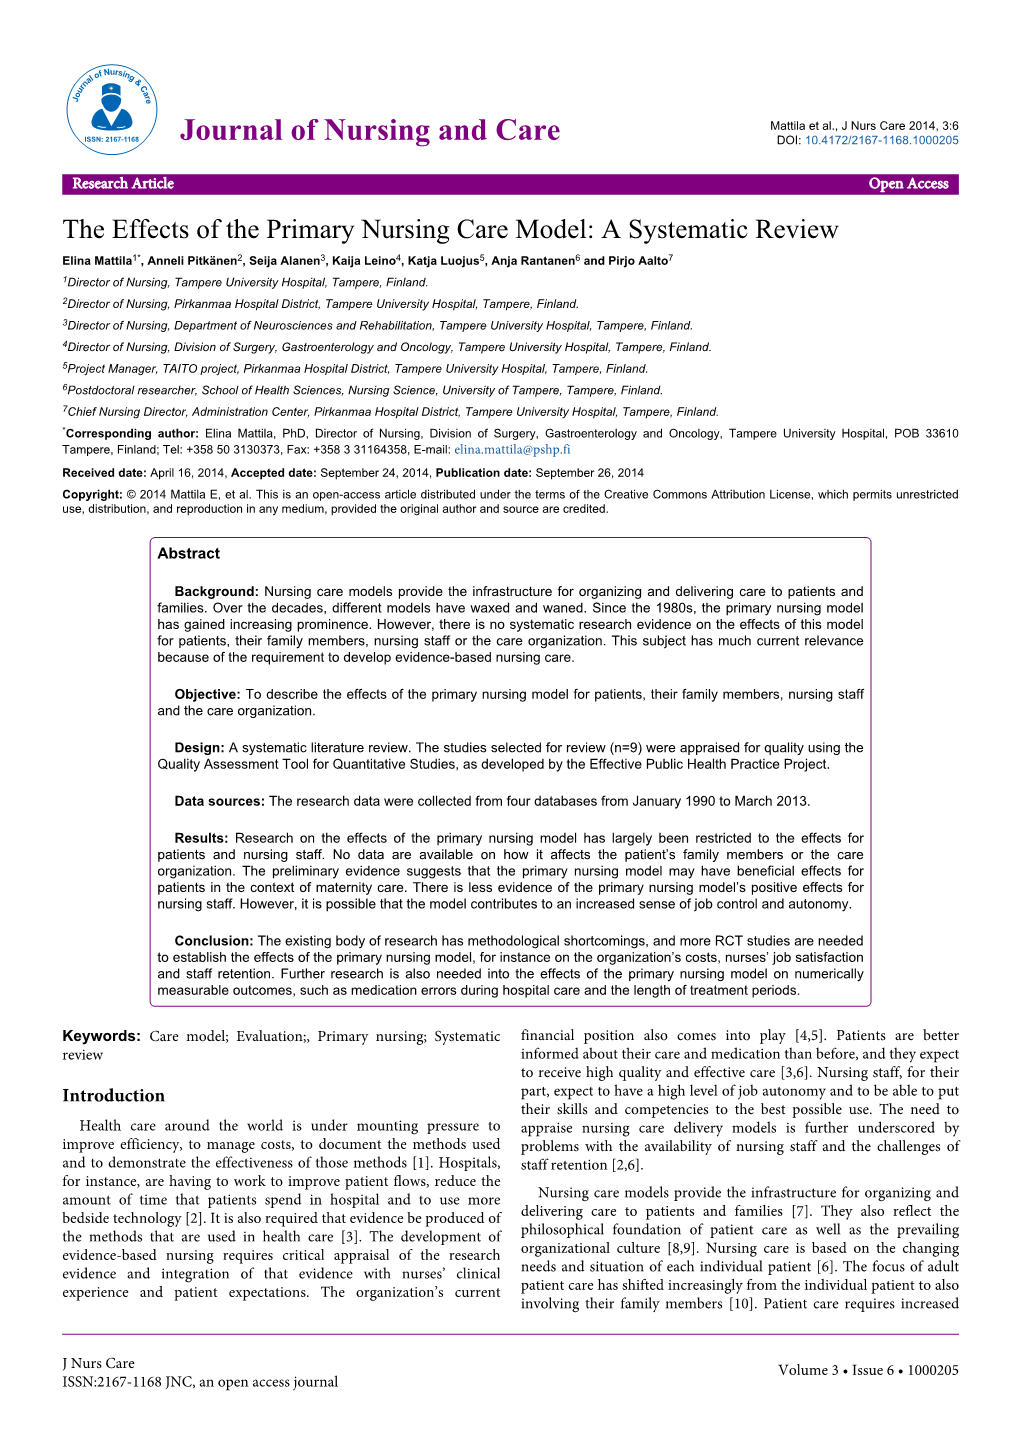 The Effects of the Primary Nursing Care Model: a Systematic Review